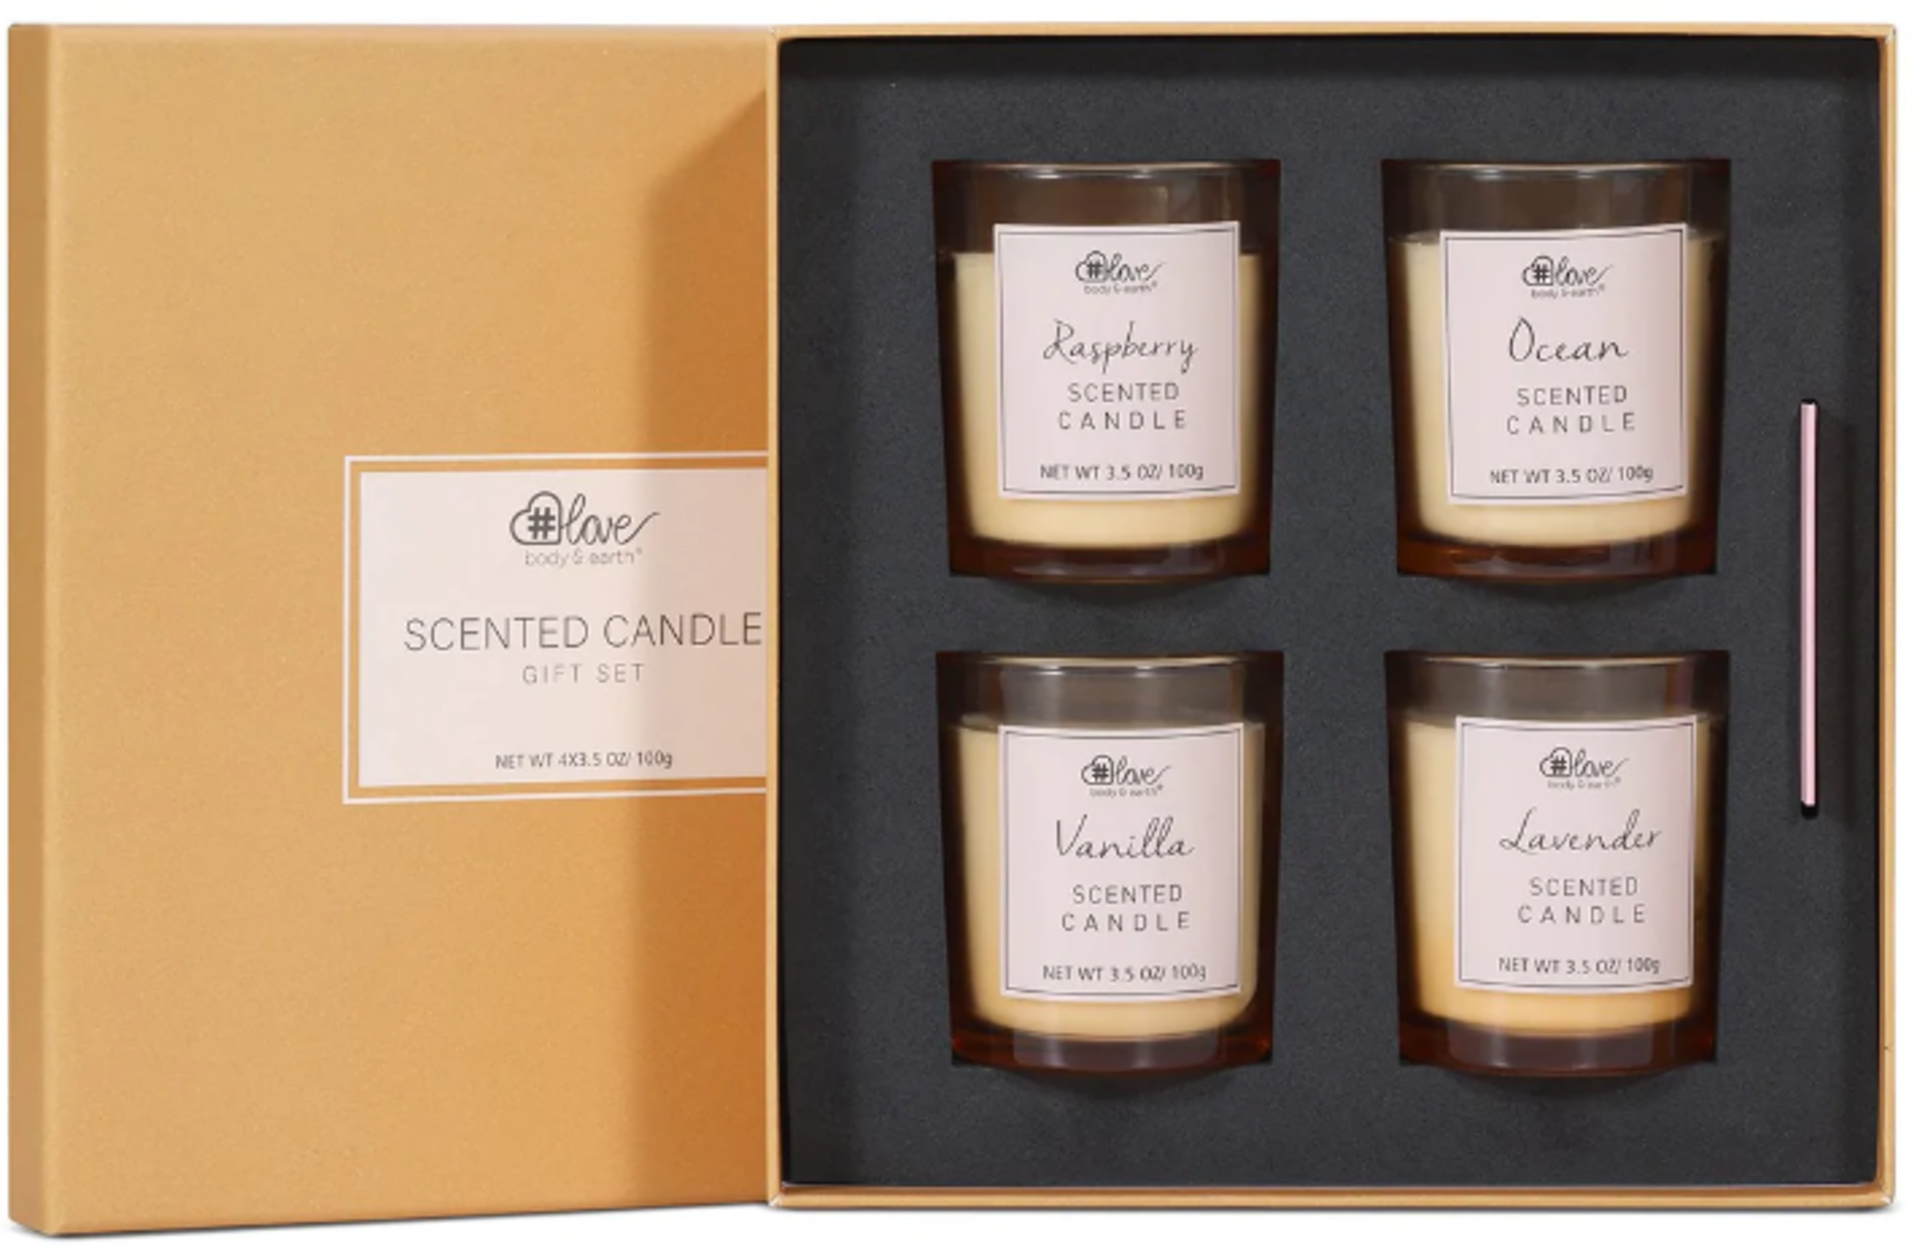 PALLET TO CONTAIN 72 x New Boxed Sets of 4 Scented Candle. (SKU:BEL-SC-01). 4 FRAGRANCE SCENTS: This